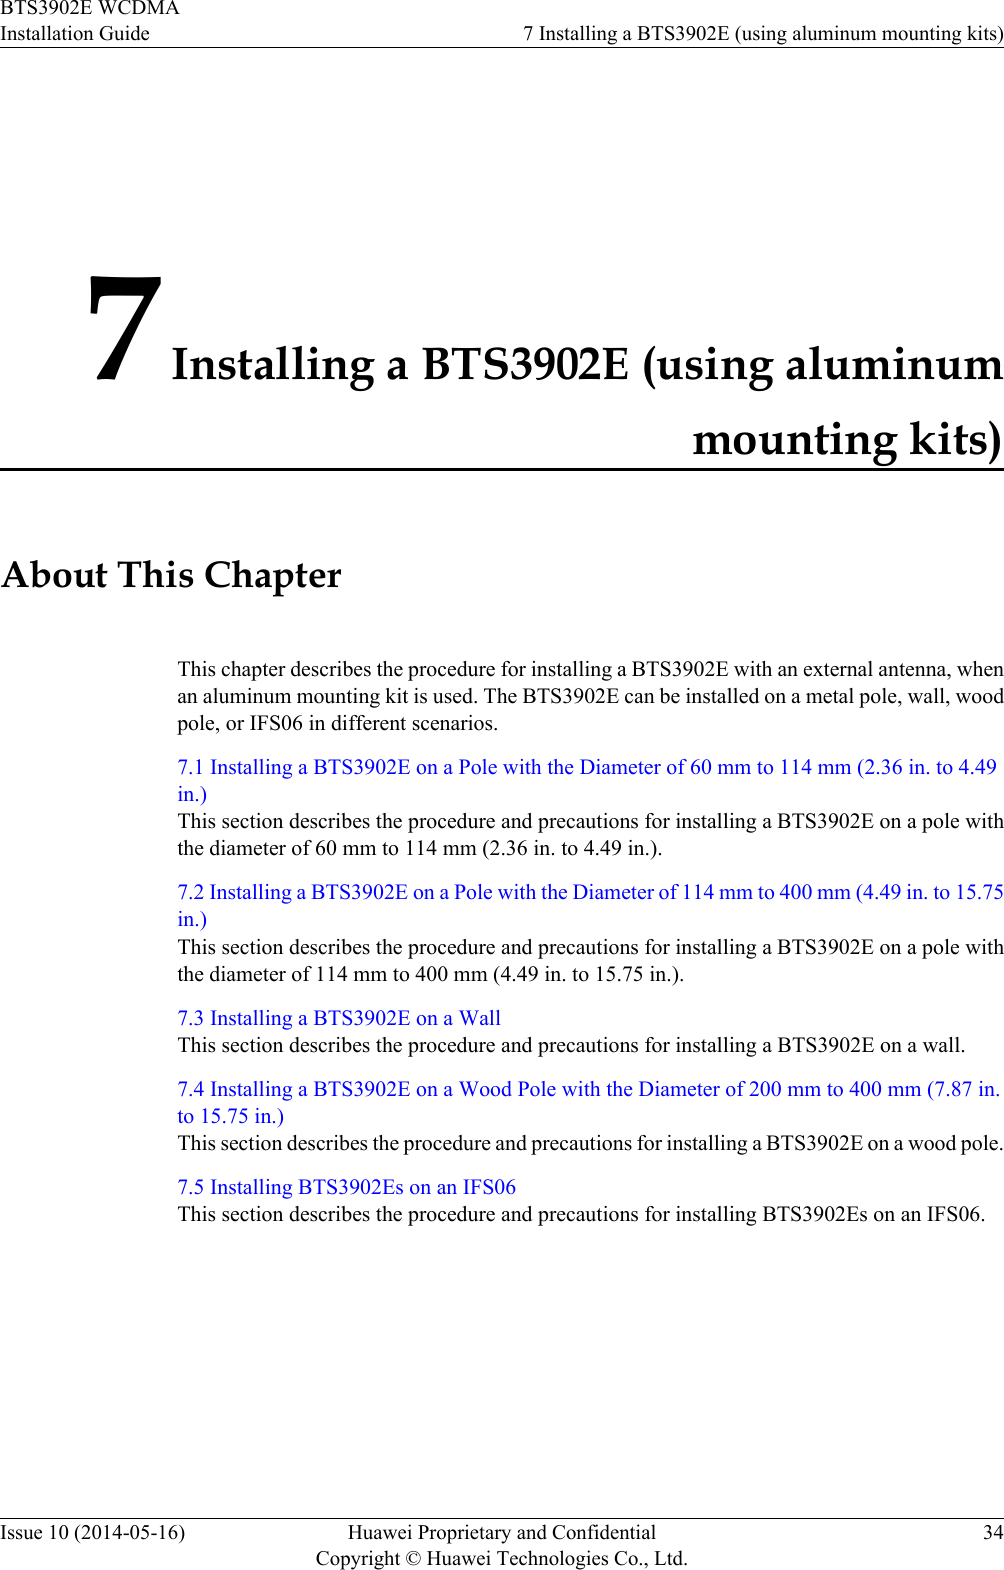 7 Installing a BTS3902E (using aluminummounting kits)About This ChapterThis chapter describes the procedure for installing a BTS3902E with an external antenna, whenan aluminum mounting kit is used. The BTS3902E can be installed on a metal pole, wall, woodpole, or IFS06 in different scenarios.7.1 Installing a BTS3902E on a Pole with the Diameter of 60 mm to 114 mm (2.36 in. to 4.49in.)This section describes the procedure and precautions for installing a BTS3902E on a pole withthe diameter of 60 mm to 114 mm (2.36 in. to 4.49 in.).7.2 Installing a BTS3902E on a Pole with the Diameter of 114 mm to 400 mm (4.49 in. to 15.75in.)This section describes the procedure and precautions for installing a BTS3902E on a pole withthe diameter of 114 mm to 400 mm (4.49 in. to 15.75 in.).7.3 Installing a BTS3902E on a WallThis section describes the procedure and precautions for installing a BTS3902E on a wall.7.4 Installing a BTS3902E on a Wood Pole with the Diameter of 200 mm to 400 mm (7.87 in.to 15.75 in.)This section describes the procedure and precautions for installing a BTS3902E on a wood pole.7.5 Installing BTS3902Es on an IFS06This section describes the procedure and precautions for installing BTS3902Es on an IFS06.BTS3902E WCDMAInstallation Guide 7 Installing a BTS3902E (using aluminum mounting kits)Issue 10 (2014-05-16) Huawei Proprietary and ConfidentialCopyright © Huawei Technologies Co., Ltd.34